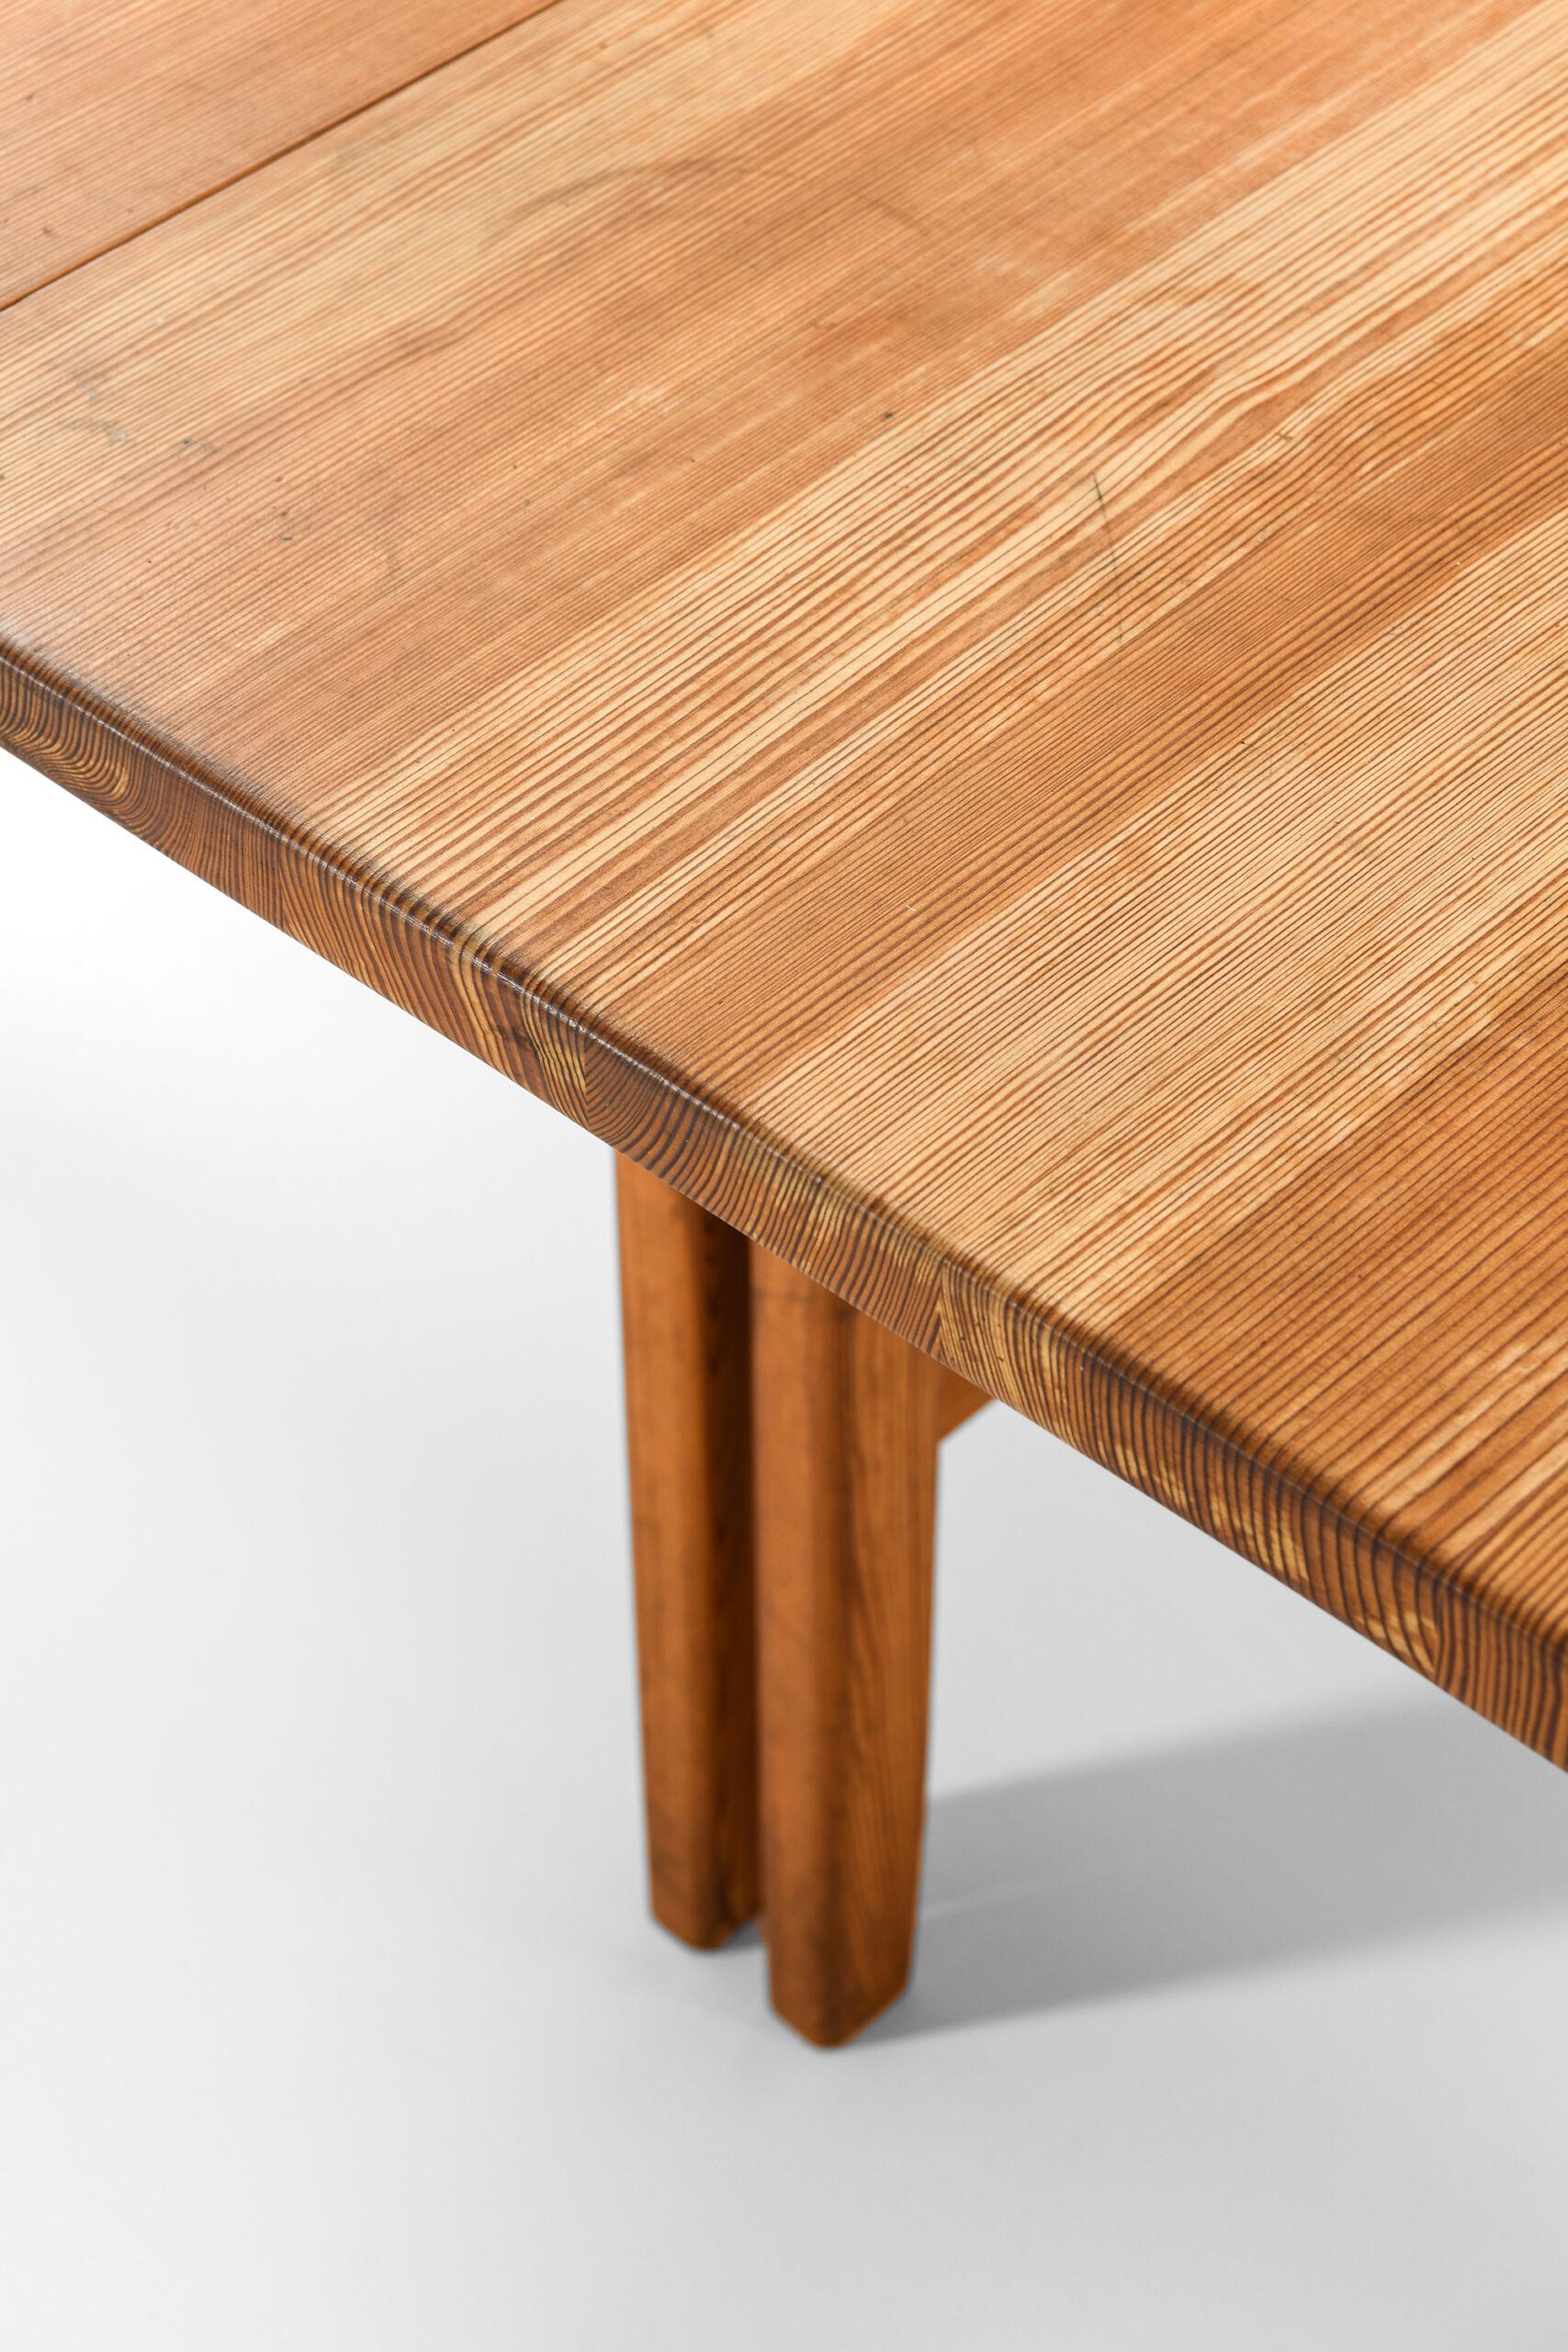 a furniture factory produces 20 dining tables